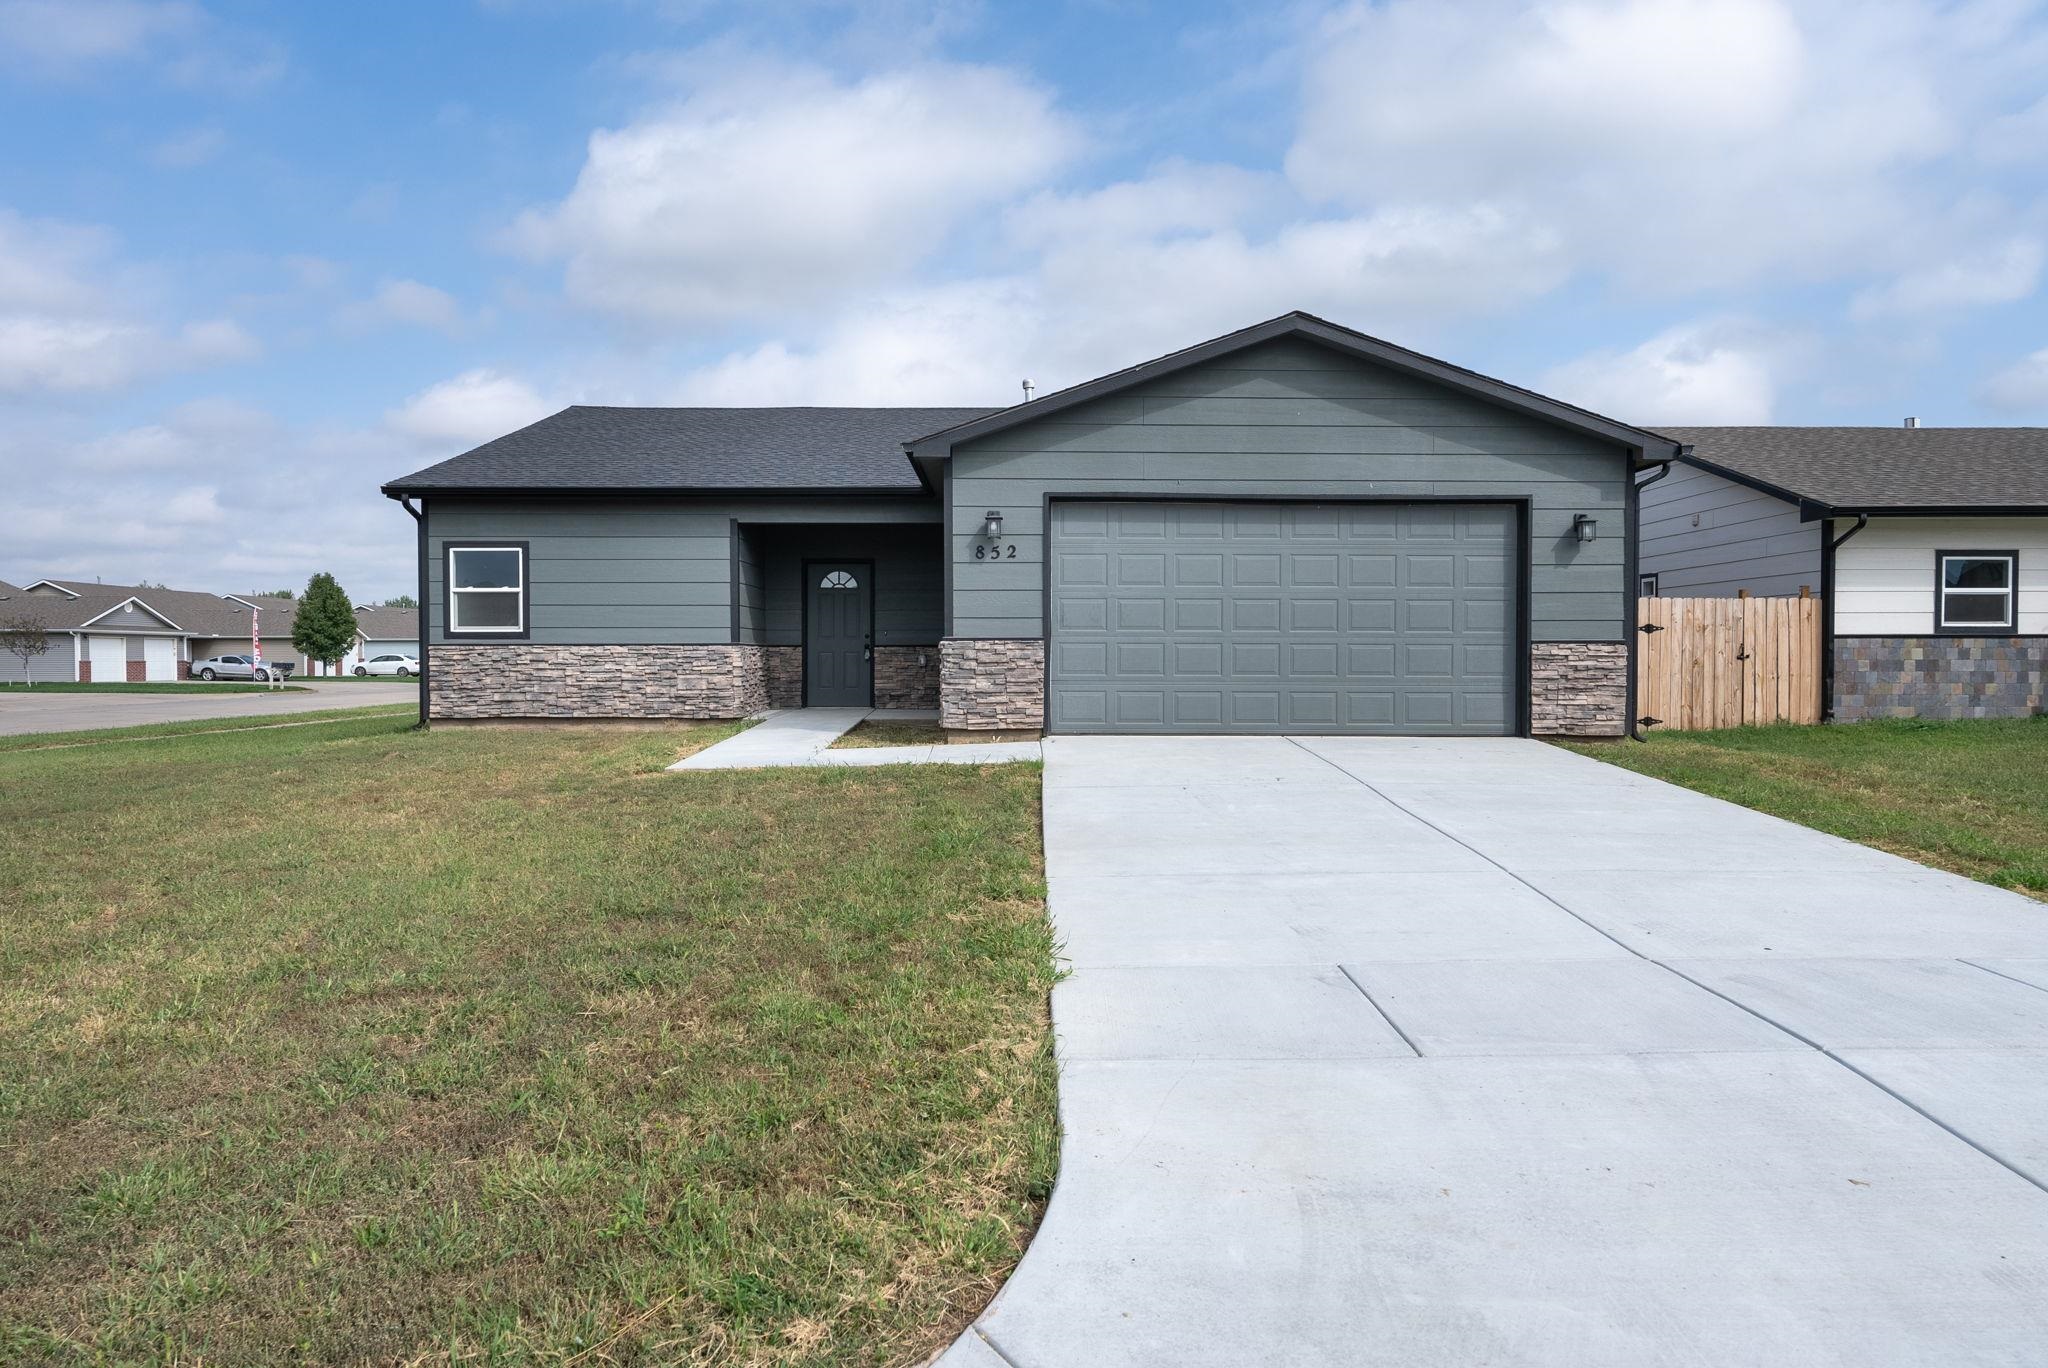 Welcome home to this brand-new 3 bed/2 bath/2 car zero-entry home in the quiet town of Valley Center